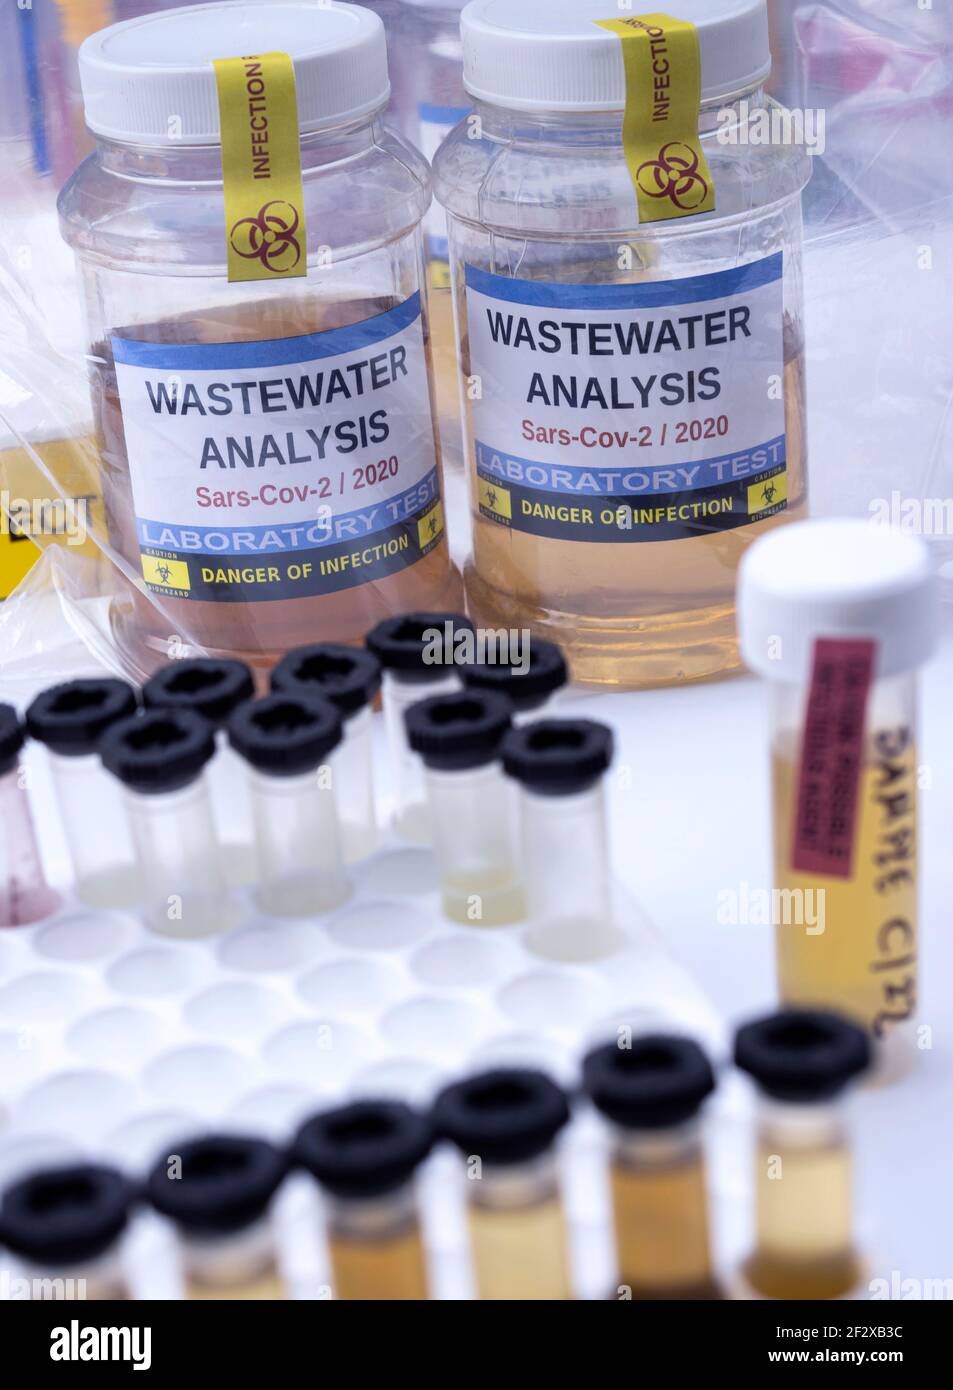 Investigation of sars-cov-2 virus in humans in a wastewater laboratory, conceptual image Stock Photo